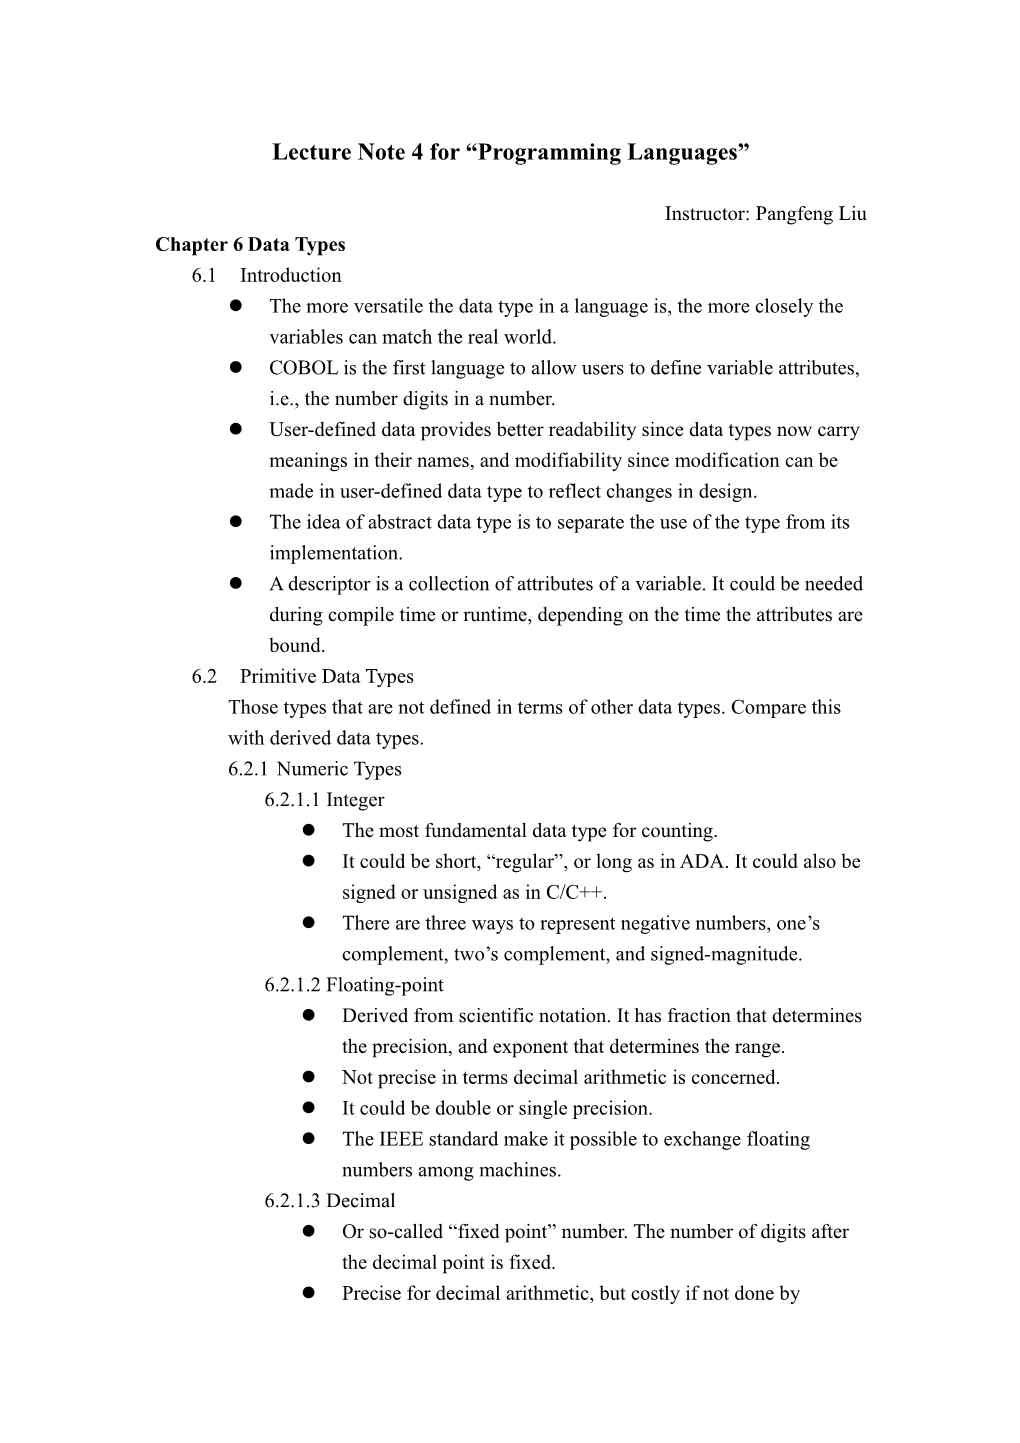 Lecture Notes for Computer Programming